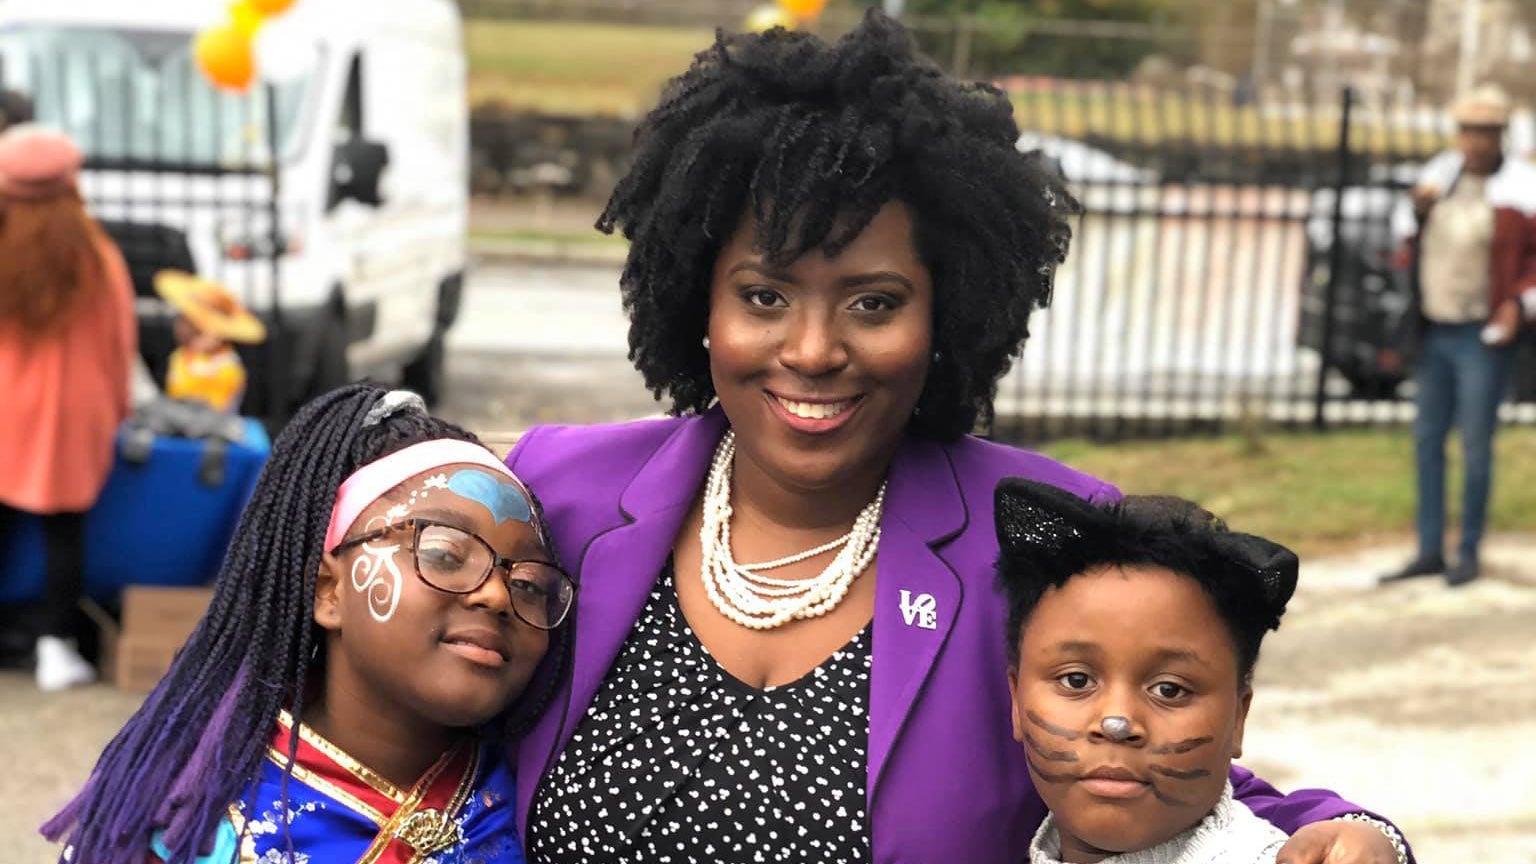 State Rep. Joanna McClinton in 2019, with constituents at the fall festival in Southwest Philadelphia, where she grew up. (Rep. McClinton)